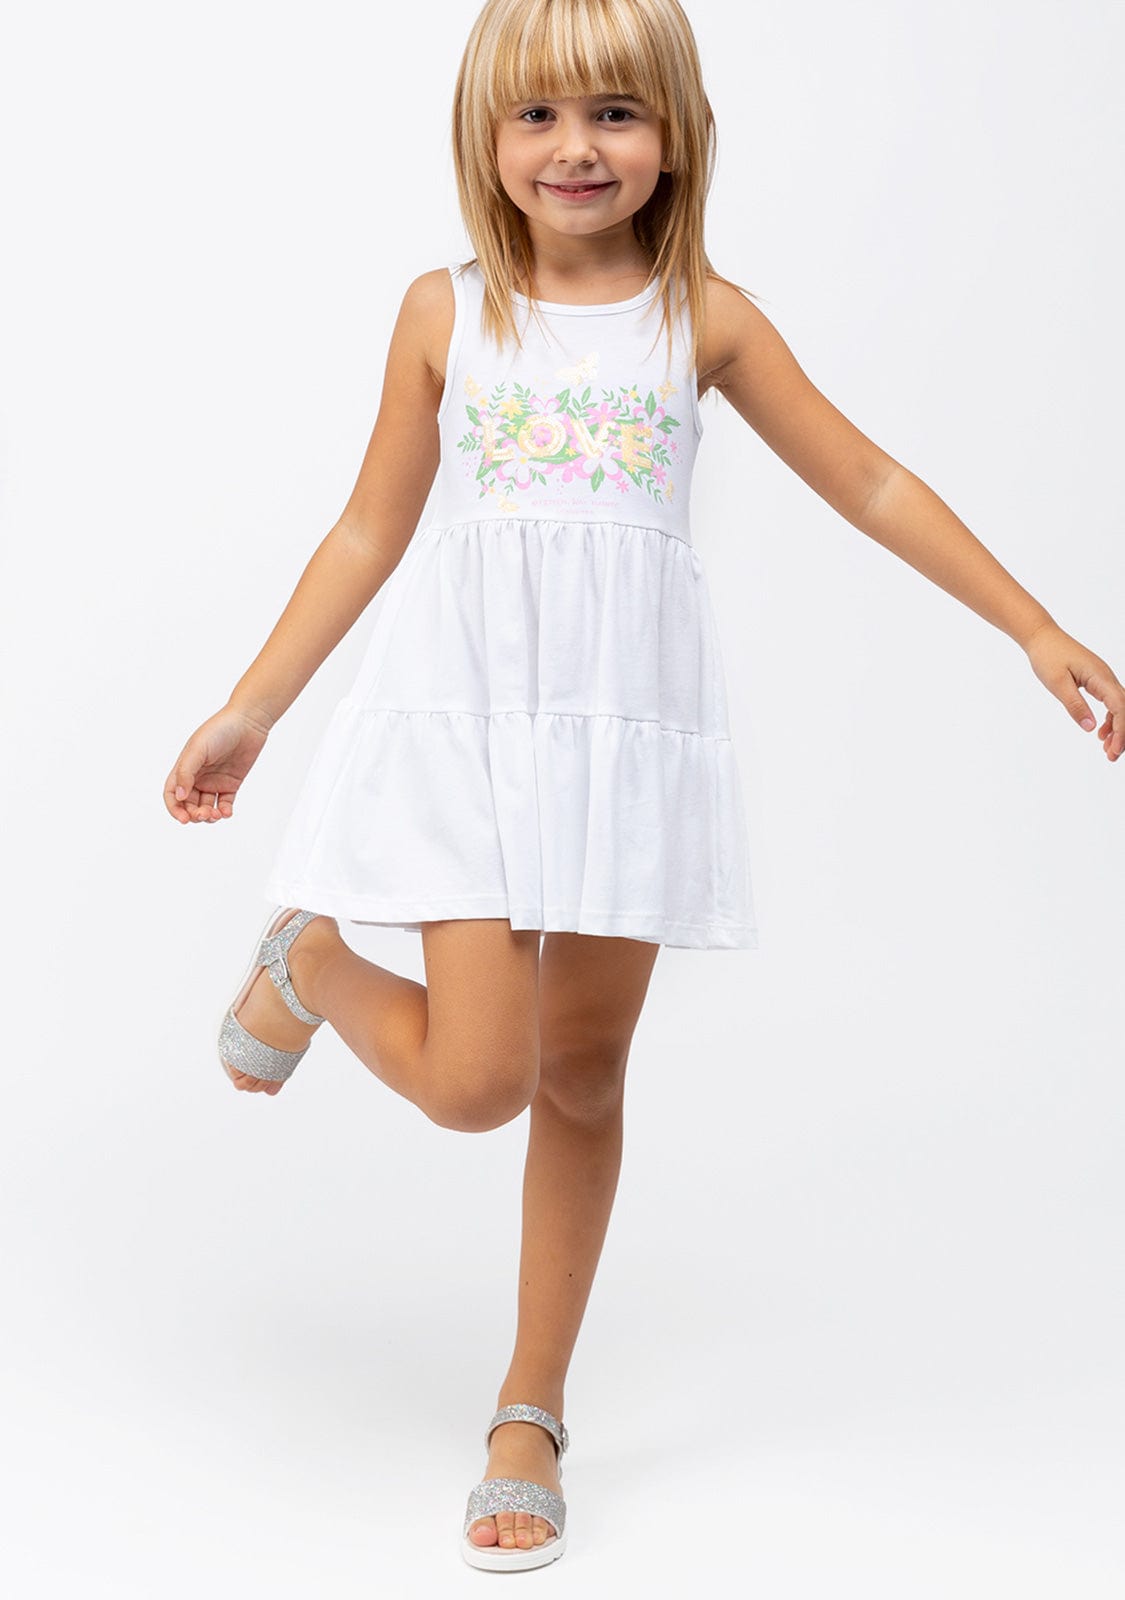 CONGUITOS TEXTIL Clothing Girl's White Love Nature Ruffled Dress